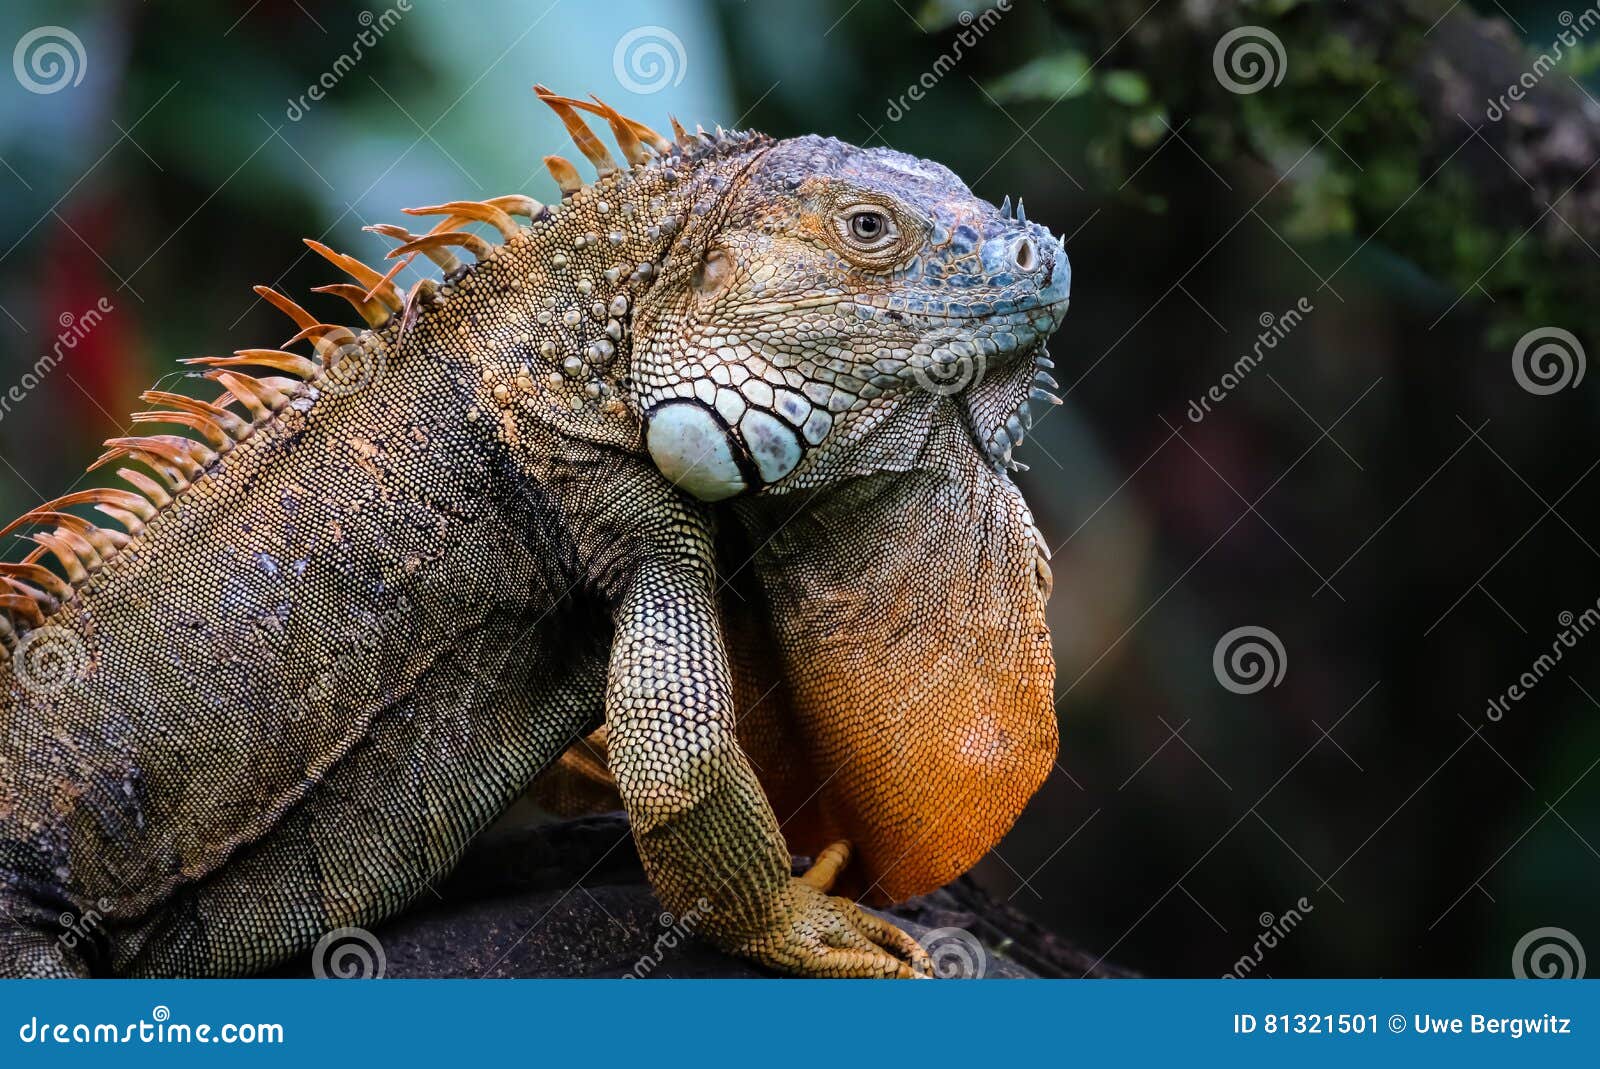 green iguana male posing with mating color